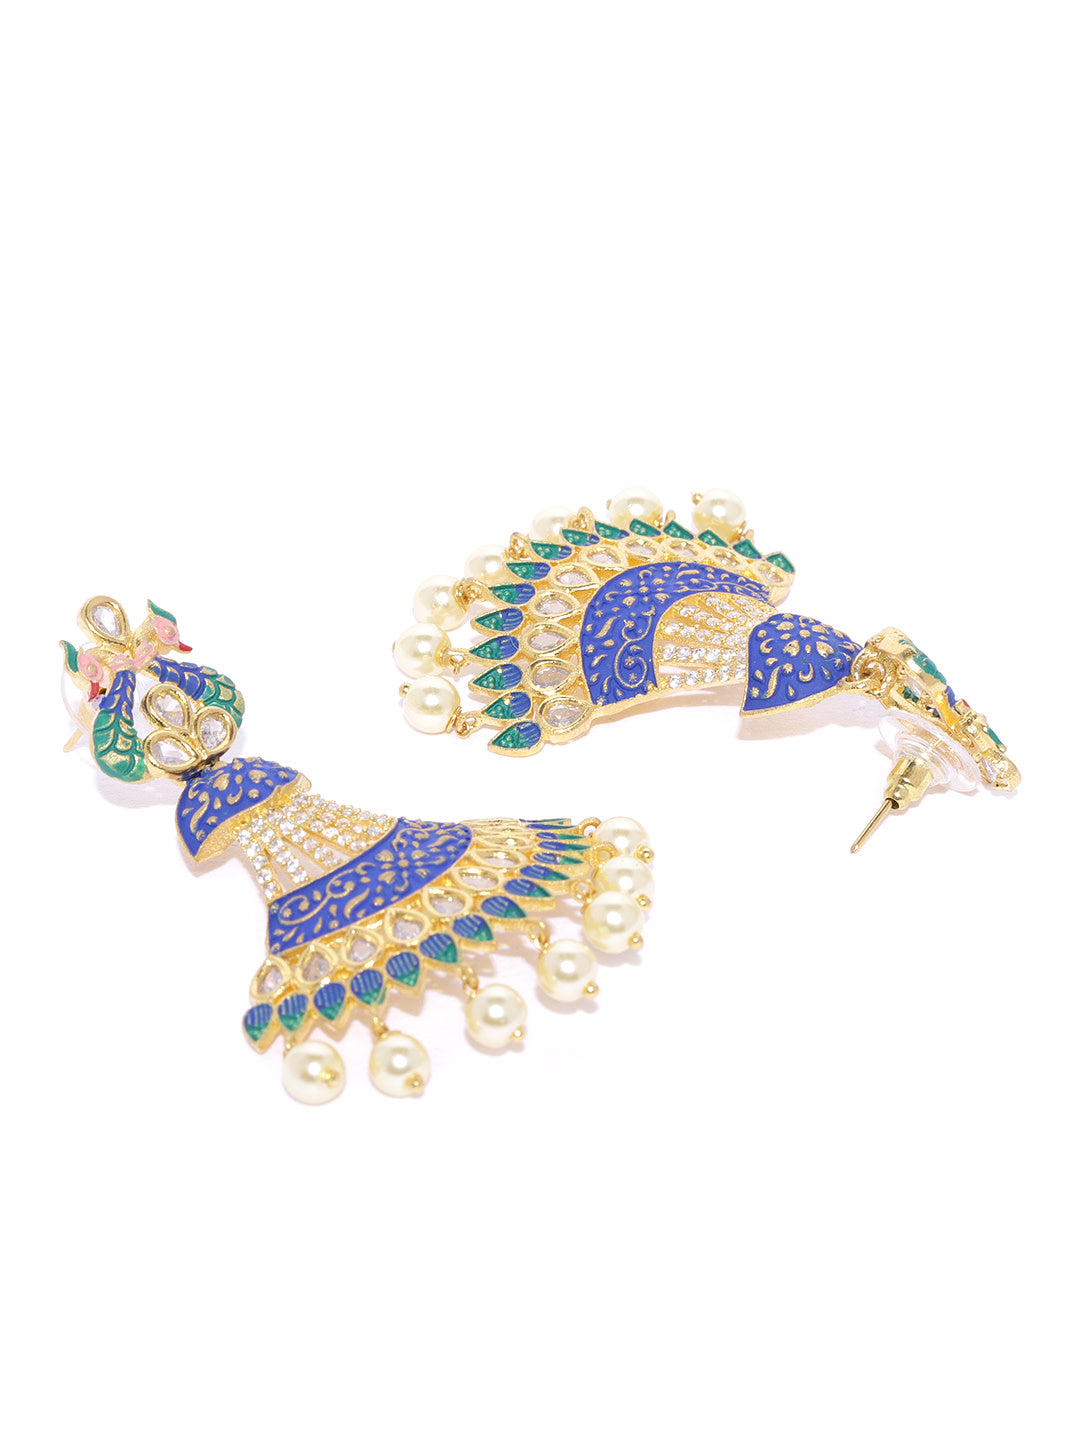 Gold-Plated American Diamond Studded Peacock Inspired Drop Earrings with Meenakari in Blue and Green Color